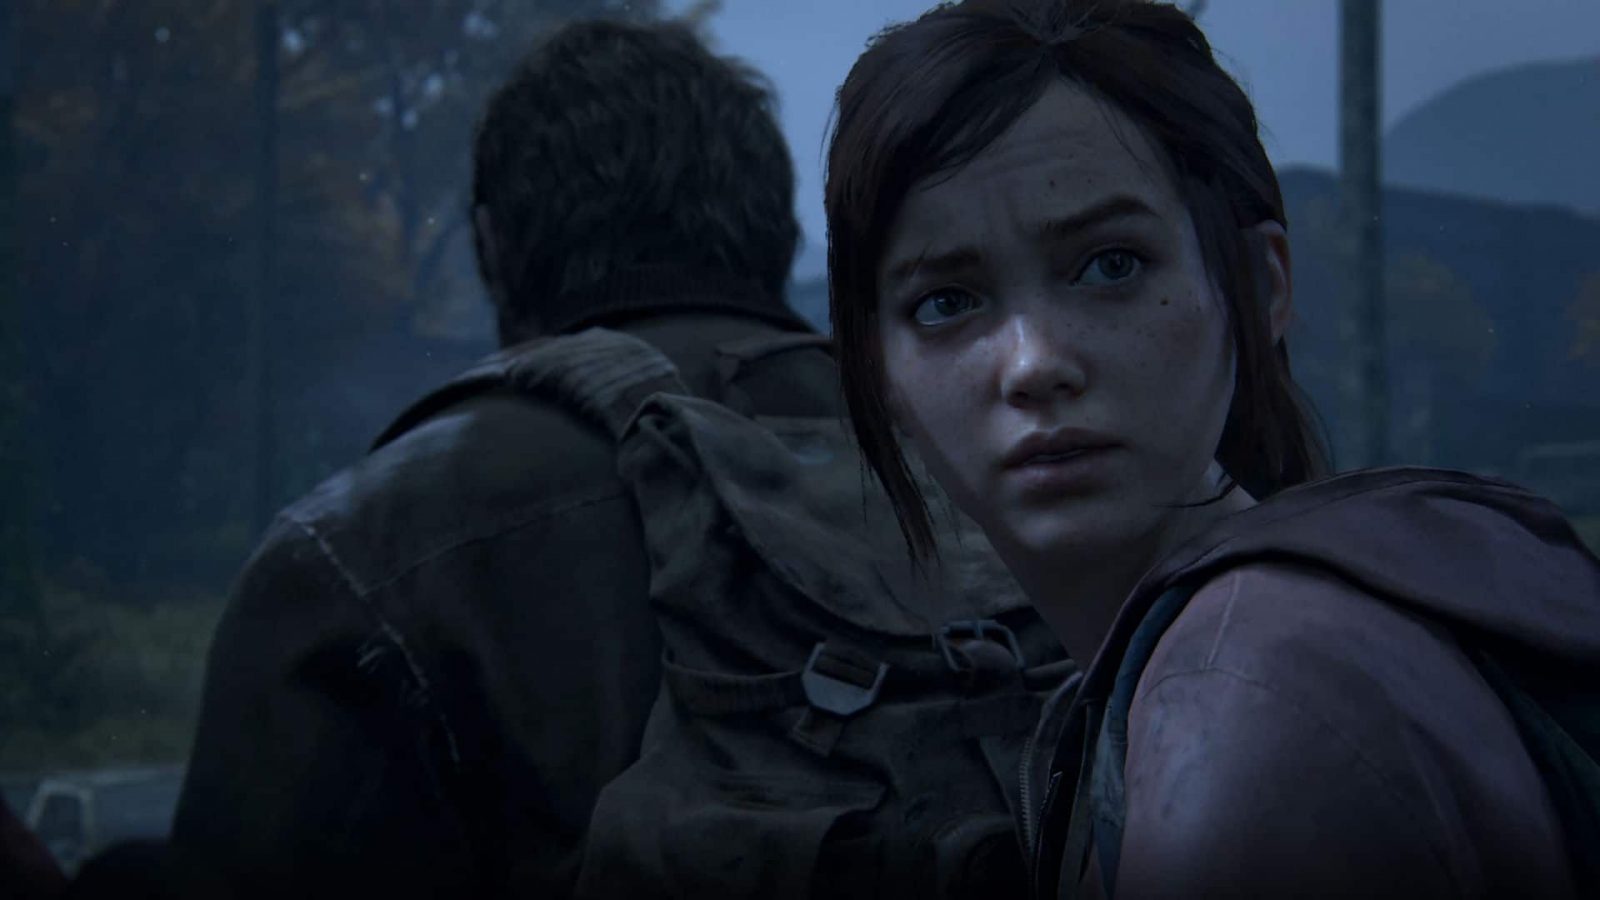 The Last Of Us Part 1 Leaked Footage Draws Criticism From Fans